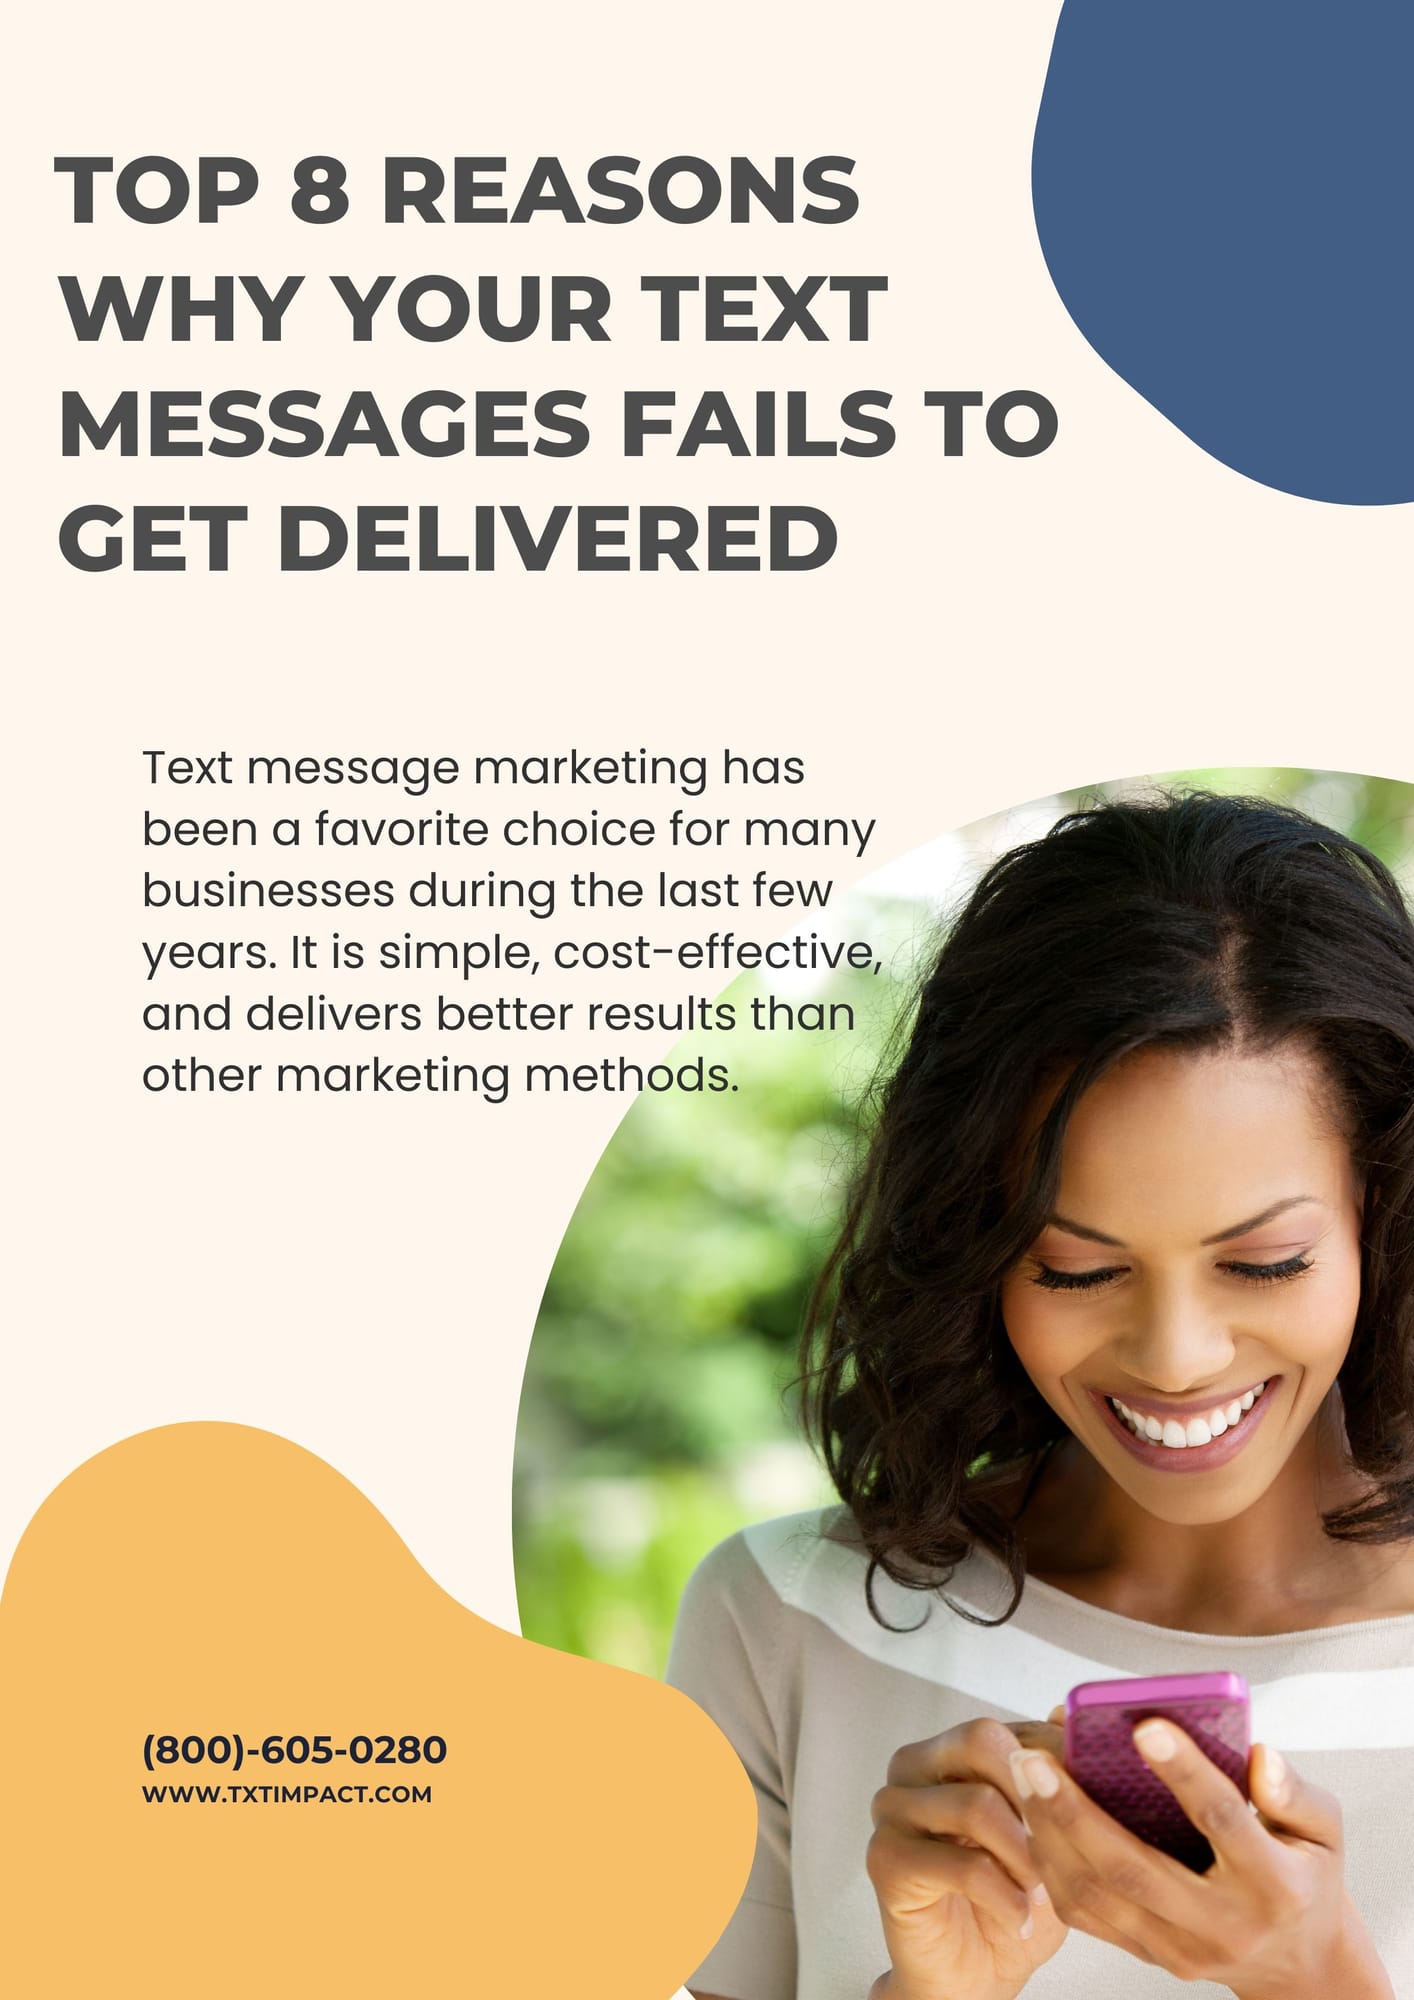 Why Your Text Messages Fails to Get Delivered (1).jpg